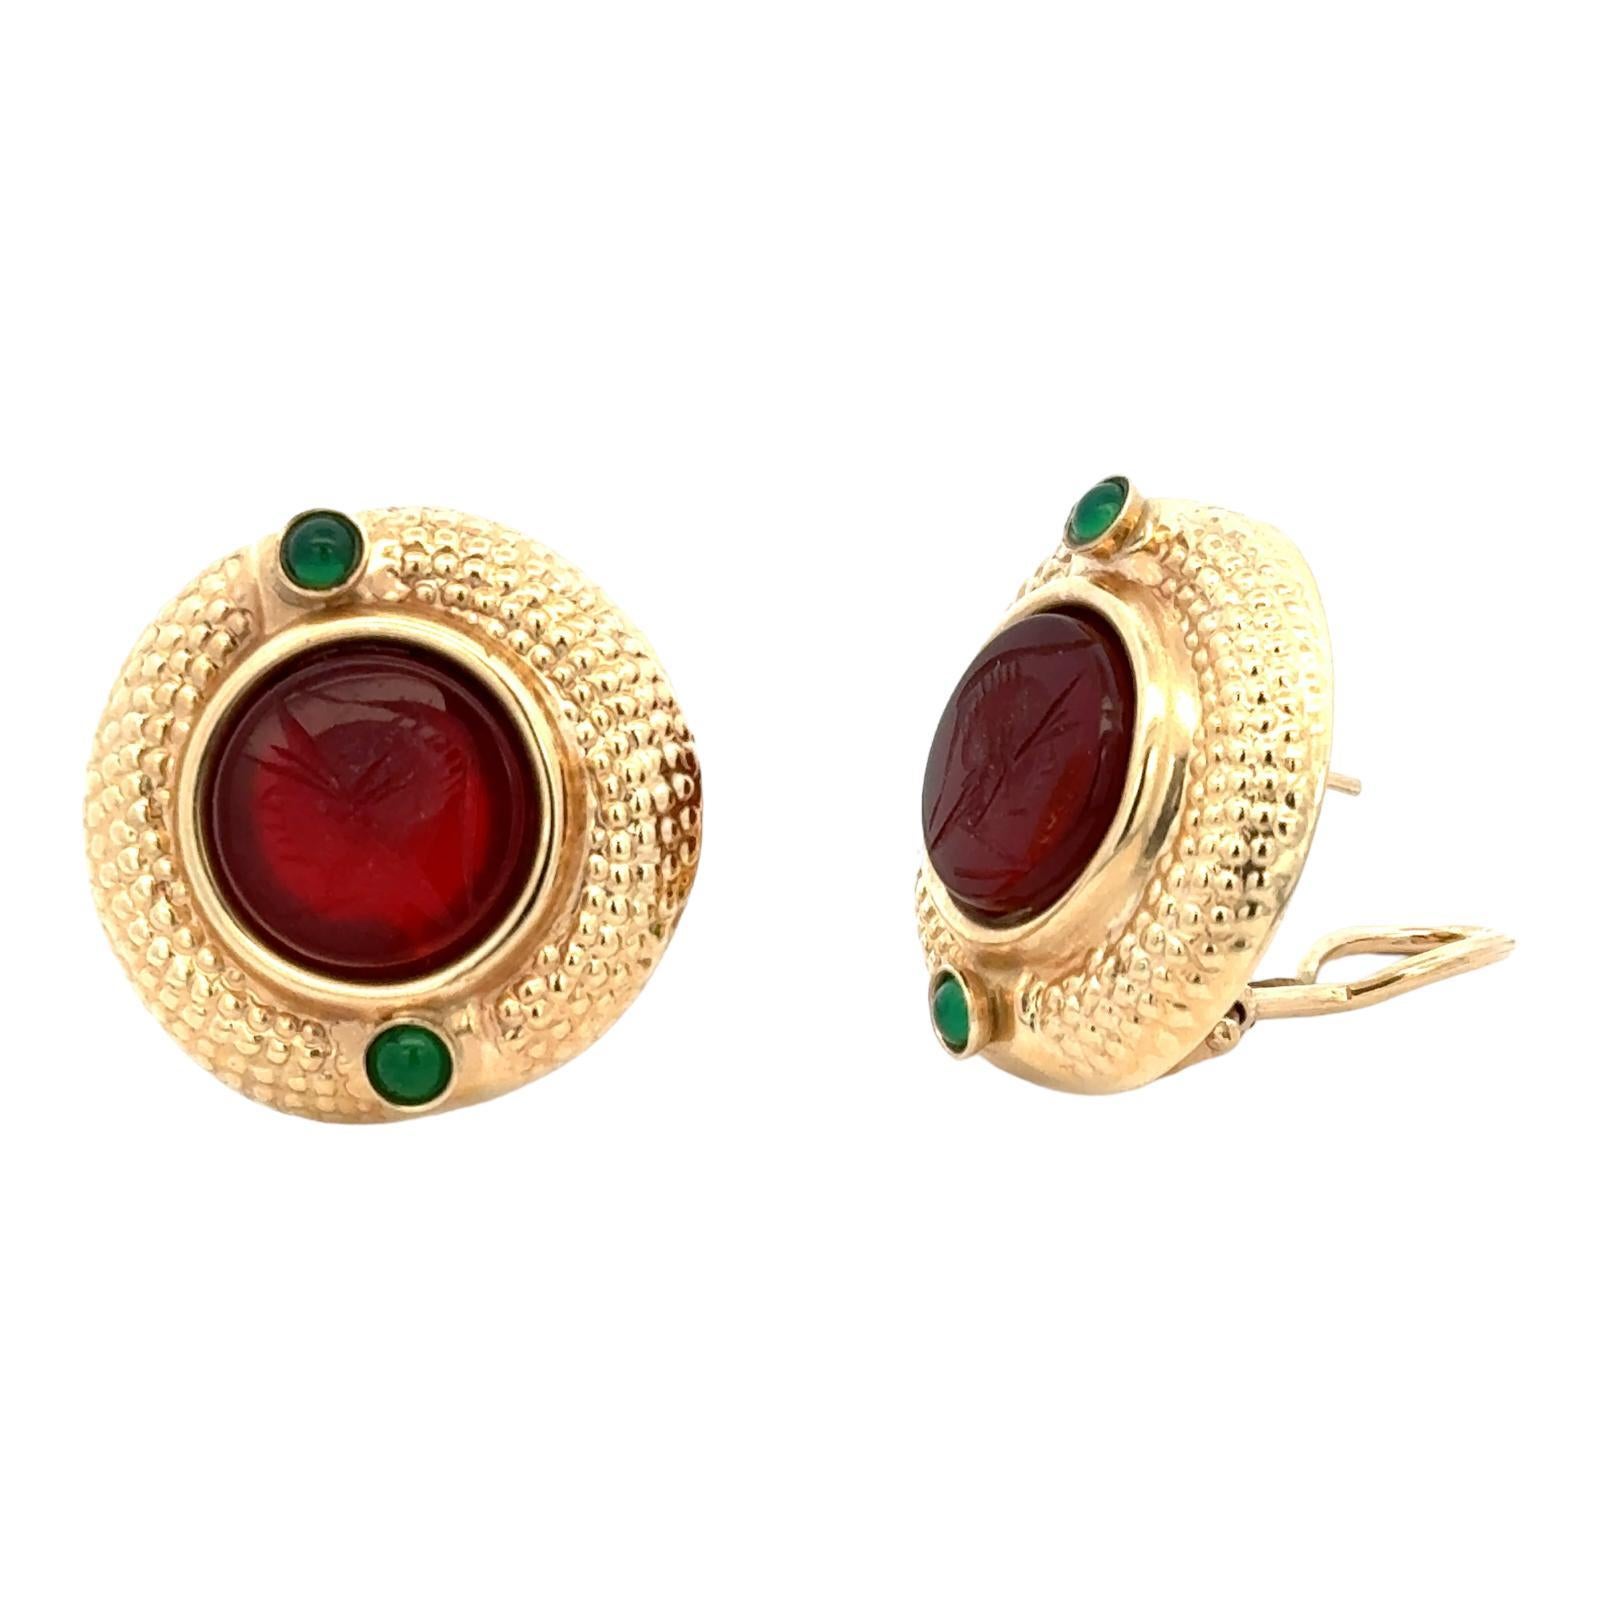 Intaglio Carnelian Emerald 14 Karat Yellow Gold Round Lever-Back Earrings In Excellent Condition For Sale In Boca Raton, FL